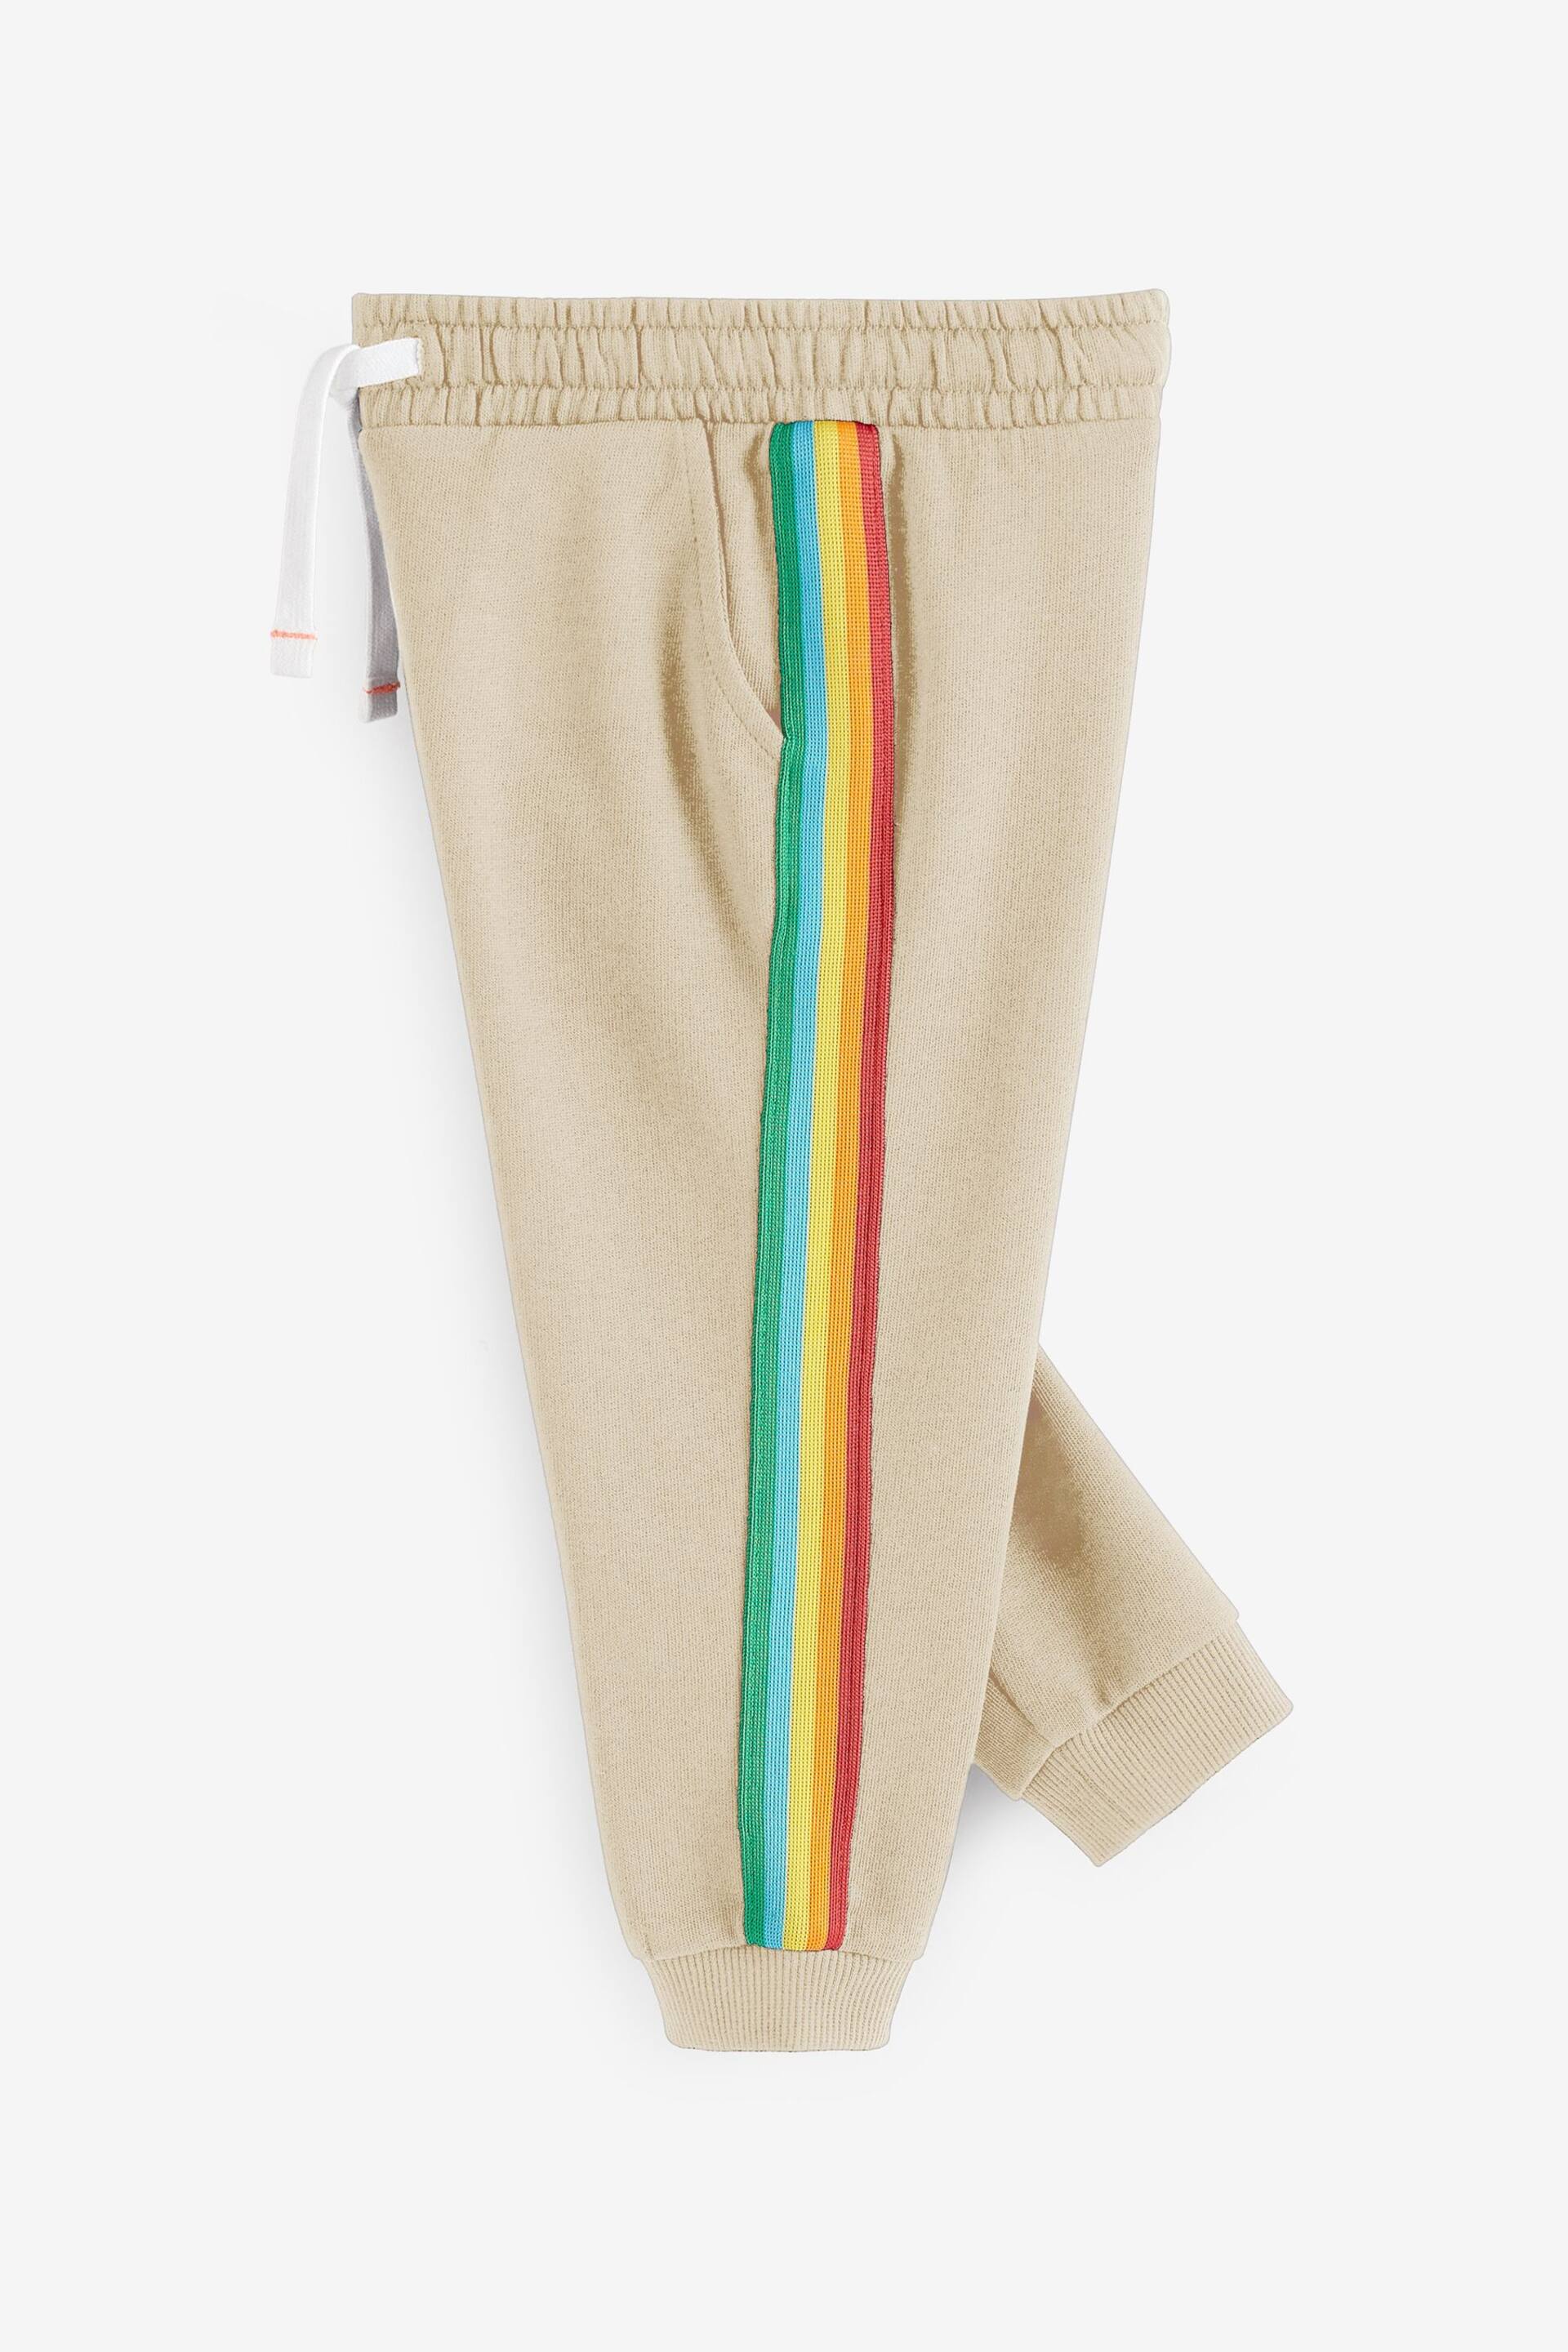 Little Bird by Jools Oliver Stone Rainbow Striped Joggers - Image 8 of 9